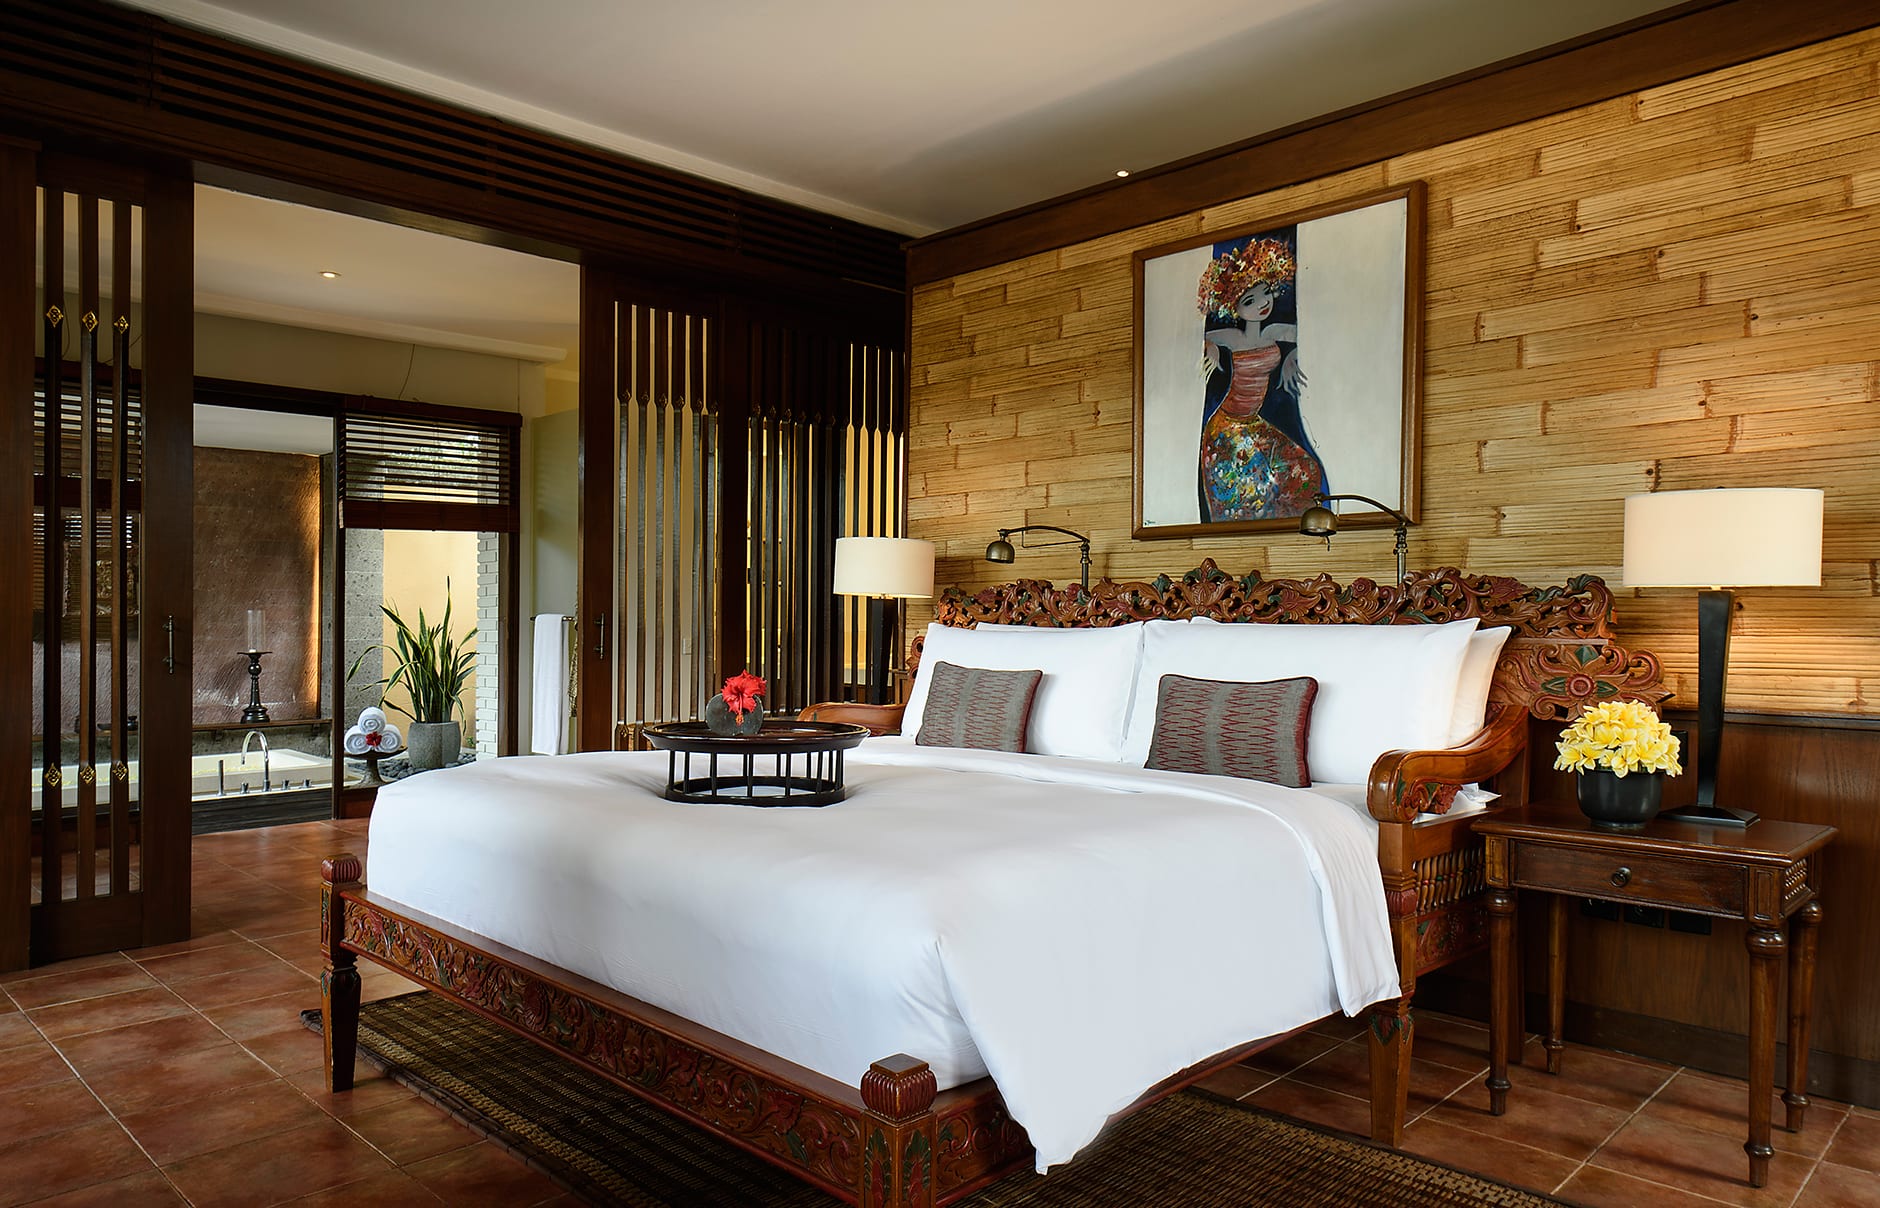 The Chedi Club Tanah Gajah, Ubud, Bali. Hotel Review by TravelPlusStyle. Photo © GHM Hotels